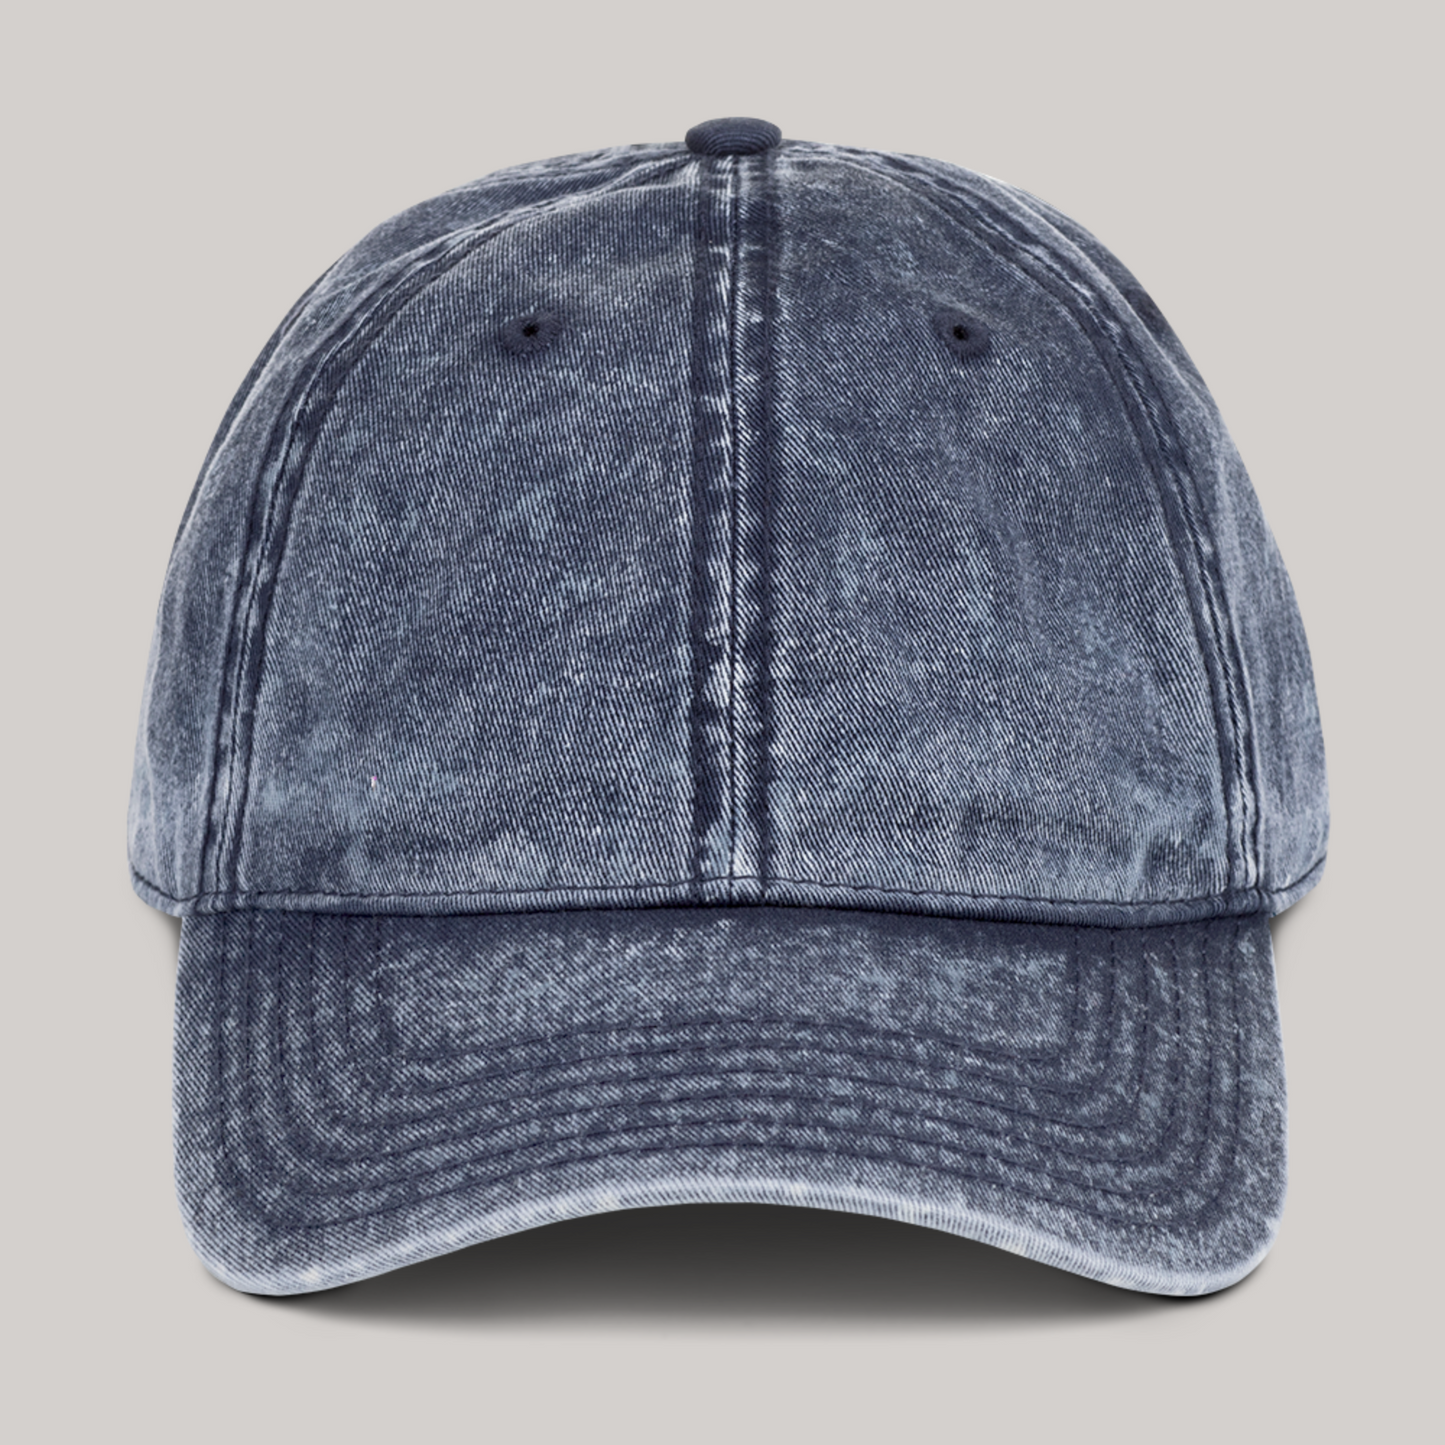 Blue grey edition of cap, denim washed out colored. 100% cotton twill, premium streetwear. Curved visor, unstructured, 6 panel, low profile